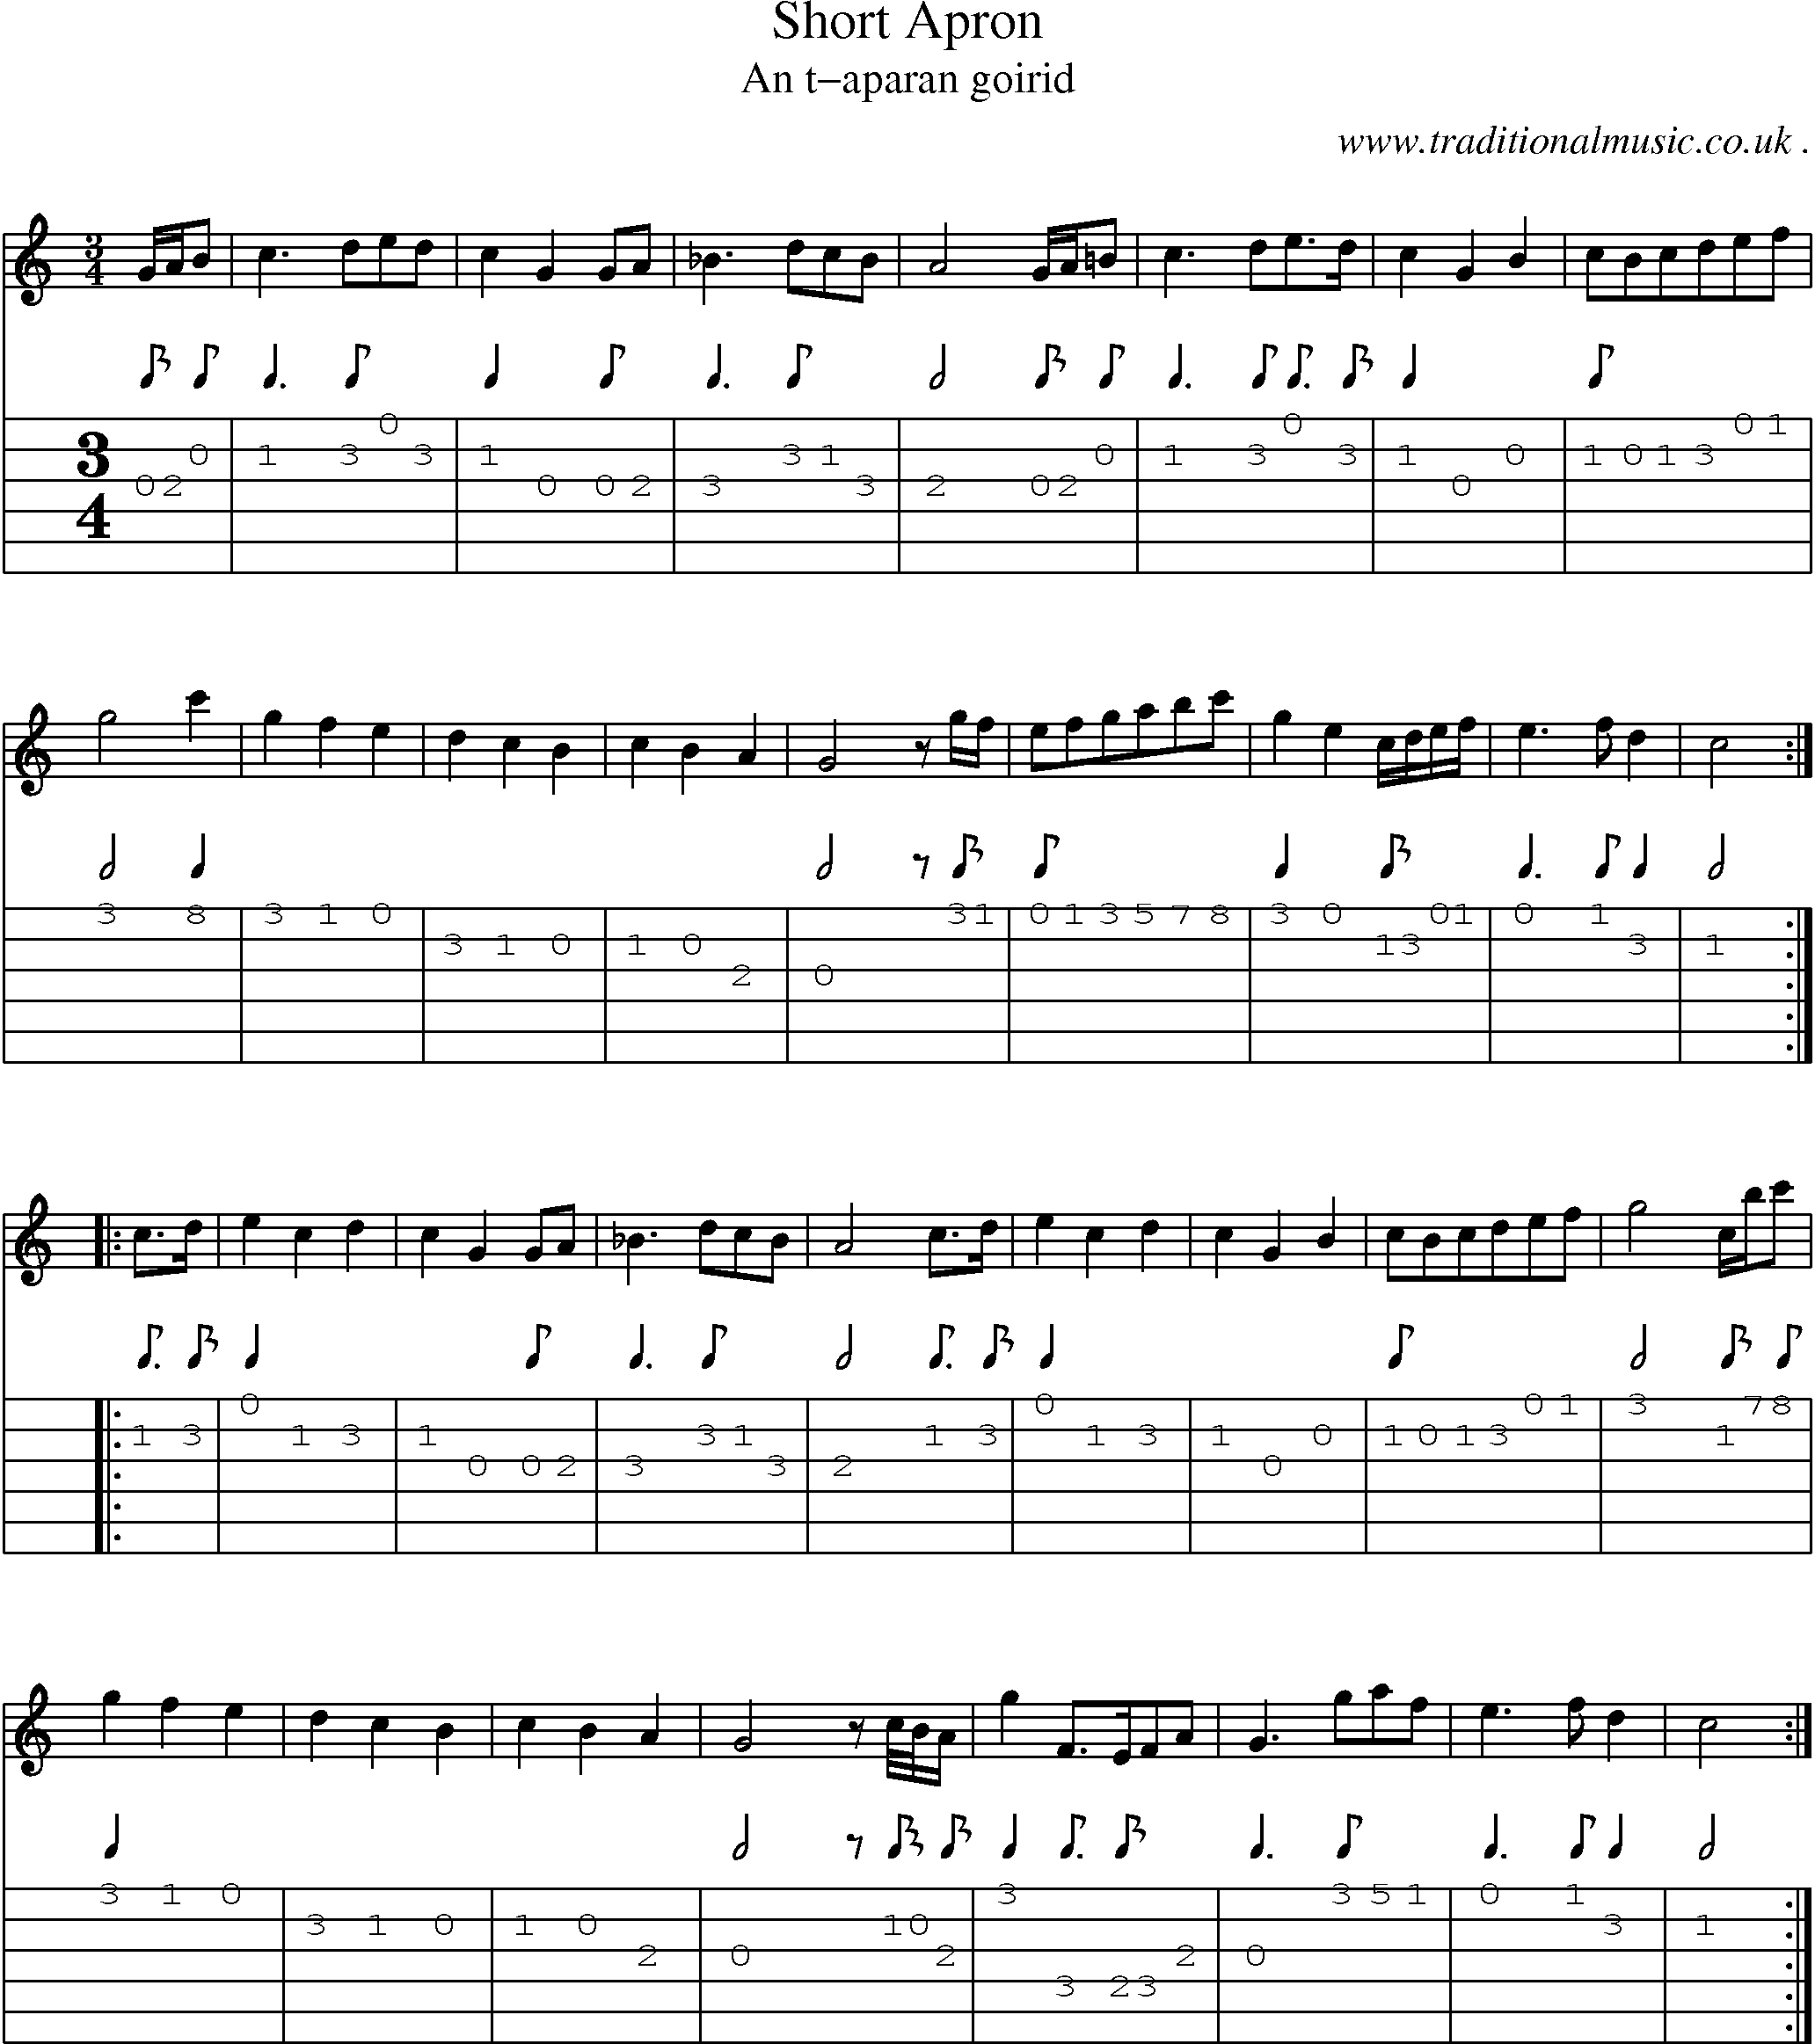 Sheet-music  score, Chords and Guitar Tabs for Short Apron